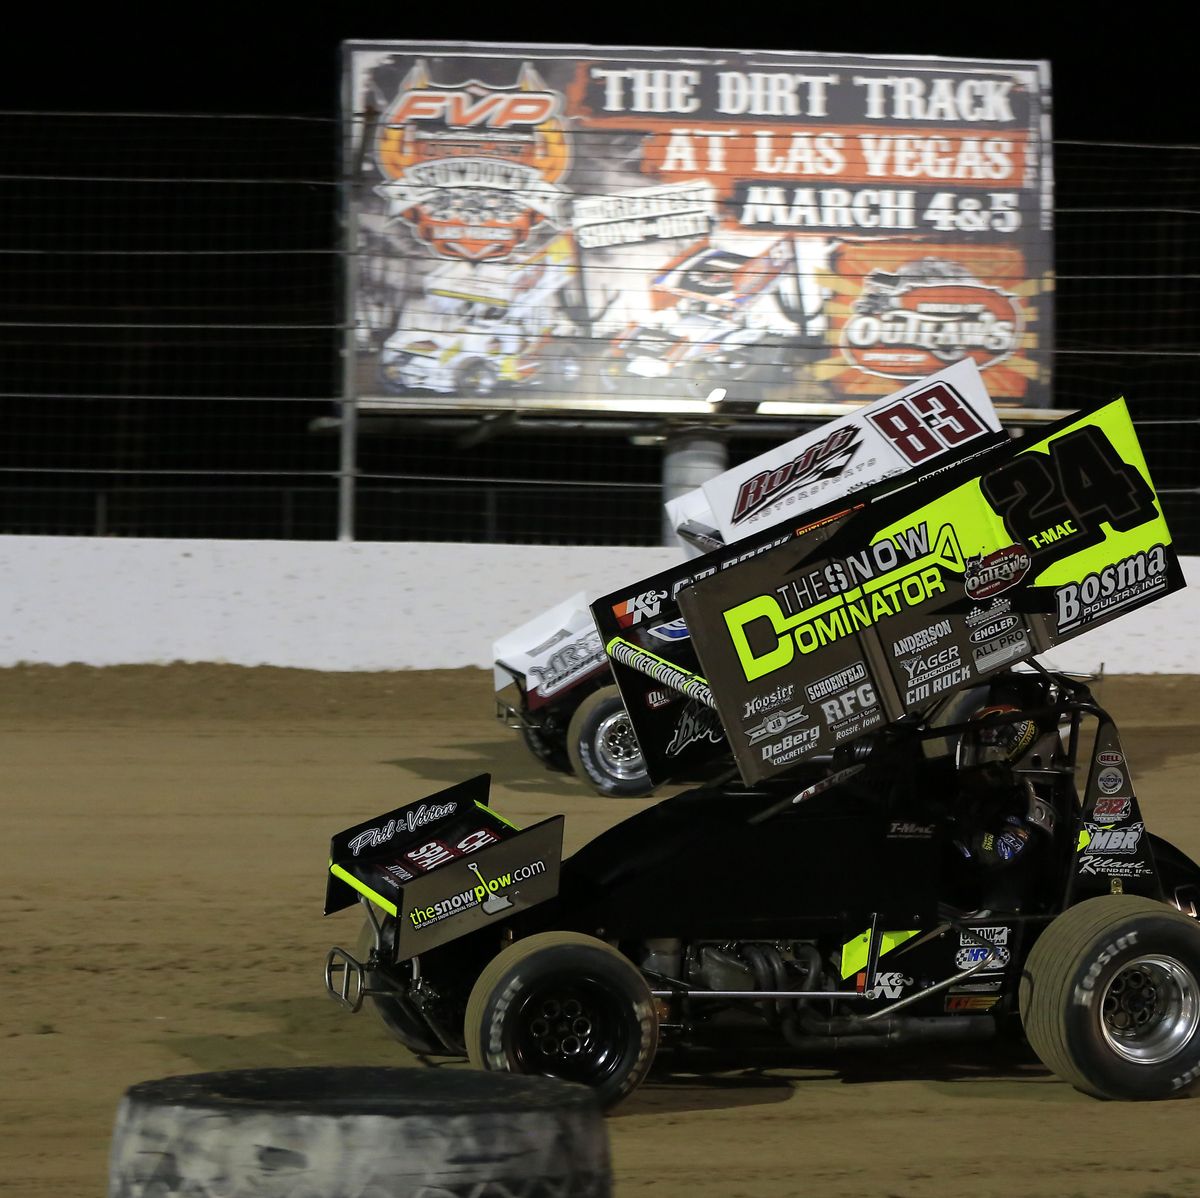 https://hips.hearstapps.com/hmg-prod/images/the-world-of-outlaws-sprint-car-fvp-outlaw-showdown-at-the-news-photo-1587663289.jpg?crop=0.668xw:1.00xh;0.279xw,0&resize=1200:*